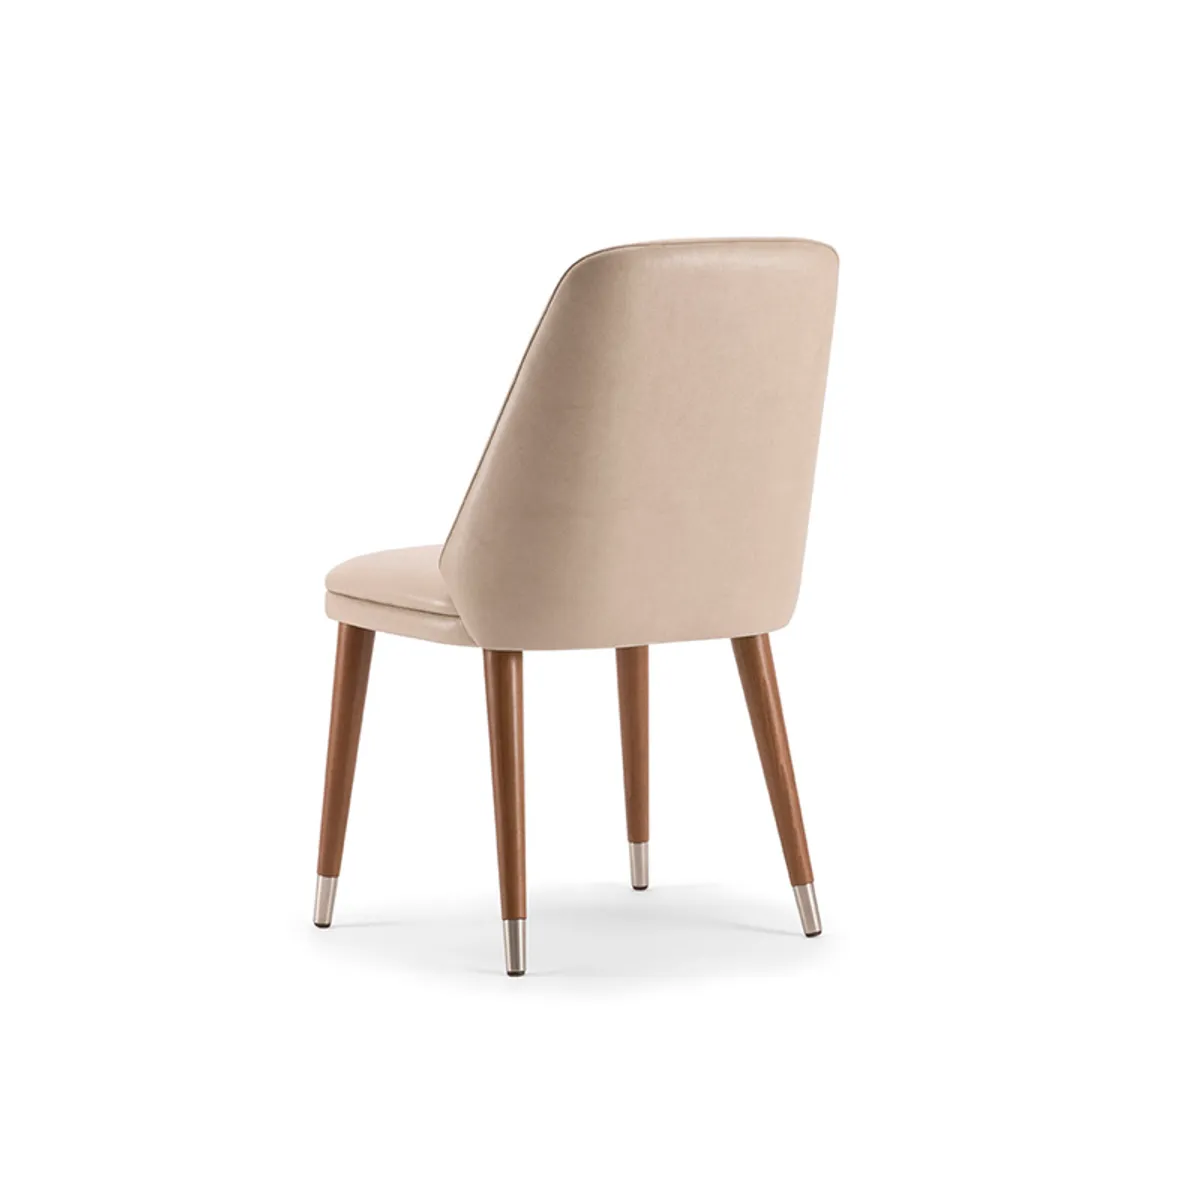 Barton Side Chair Upholstered Chair With Wooden Legs And Metal Slipper Cups Insideoutcontracts074 4